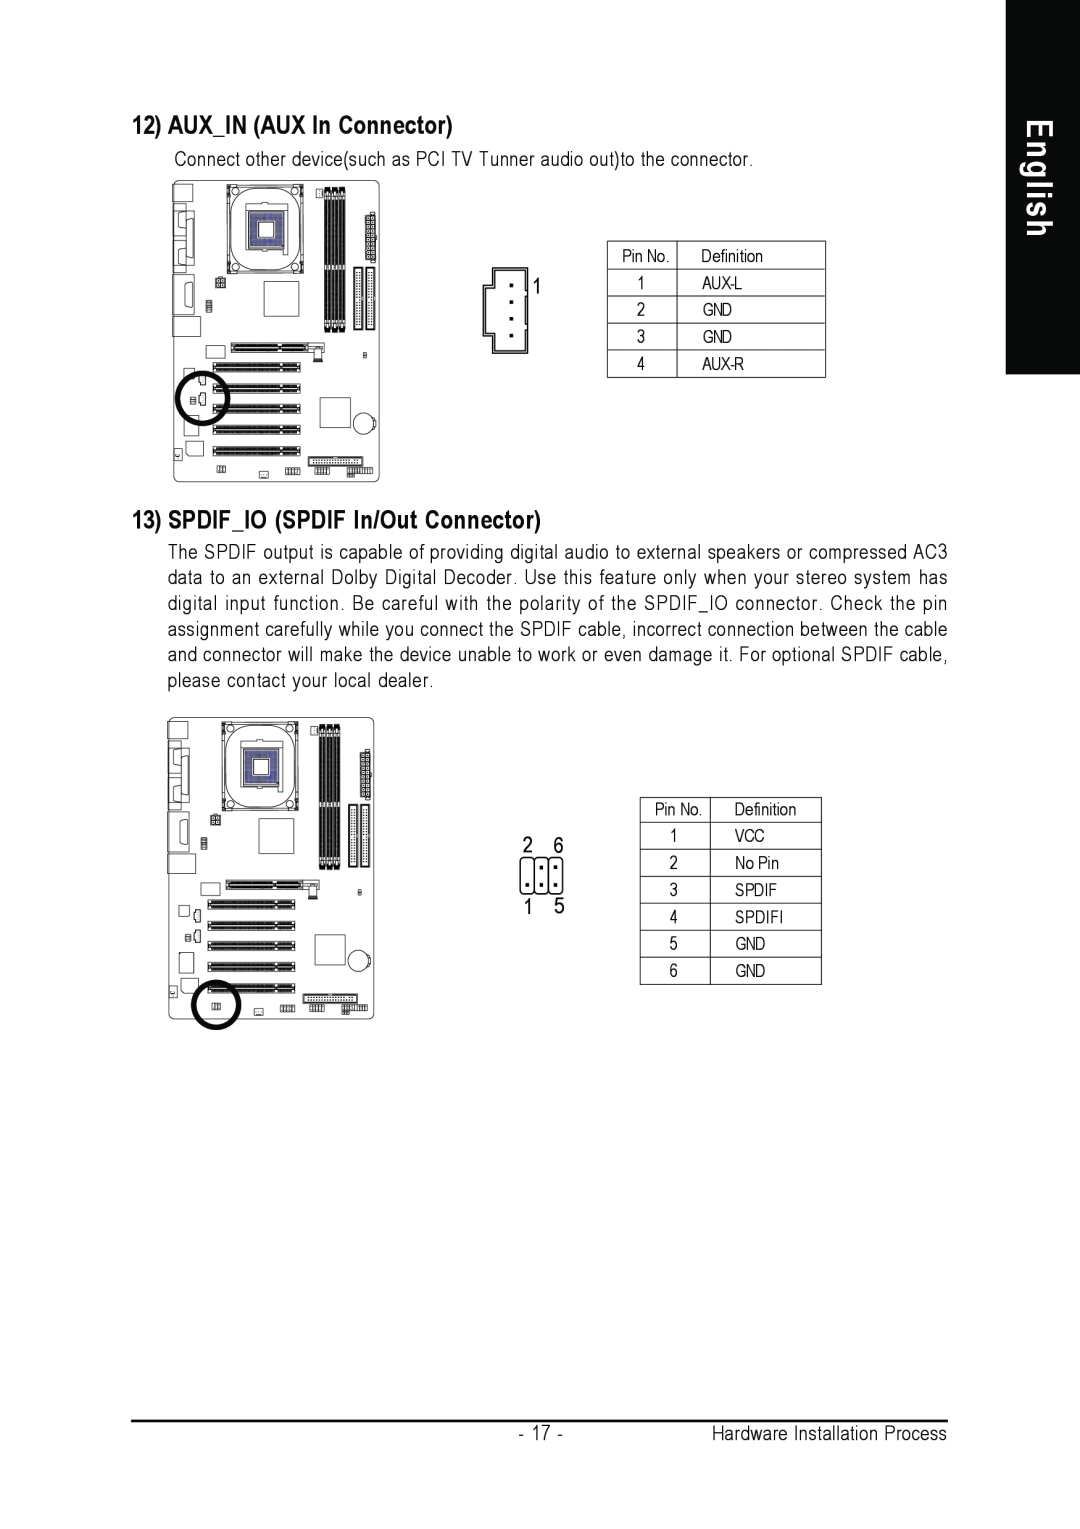 Gigabyte 8S648FX-RZ-C user manual English, AUXIN AUX In Connector, SPDIFIO SPDIF In/Out Connector 